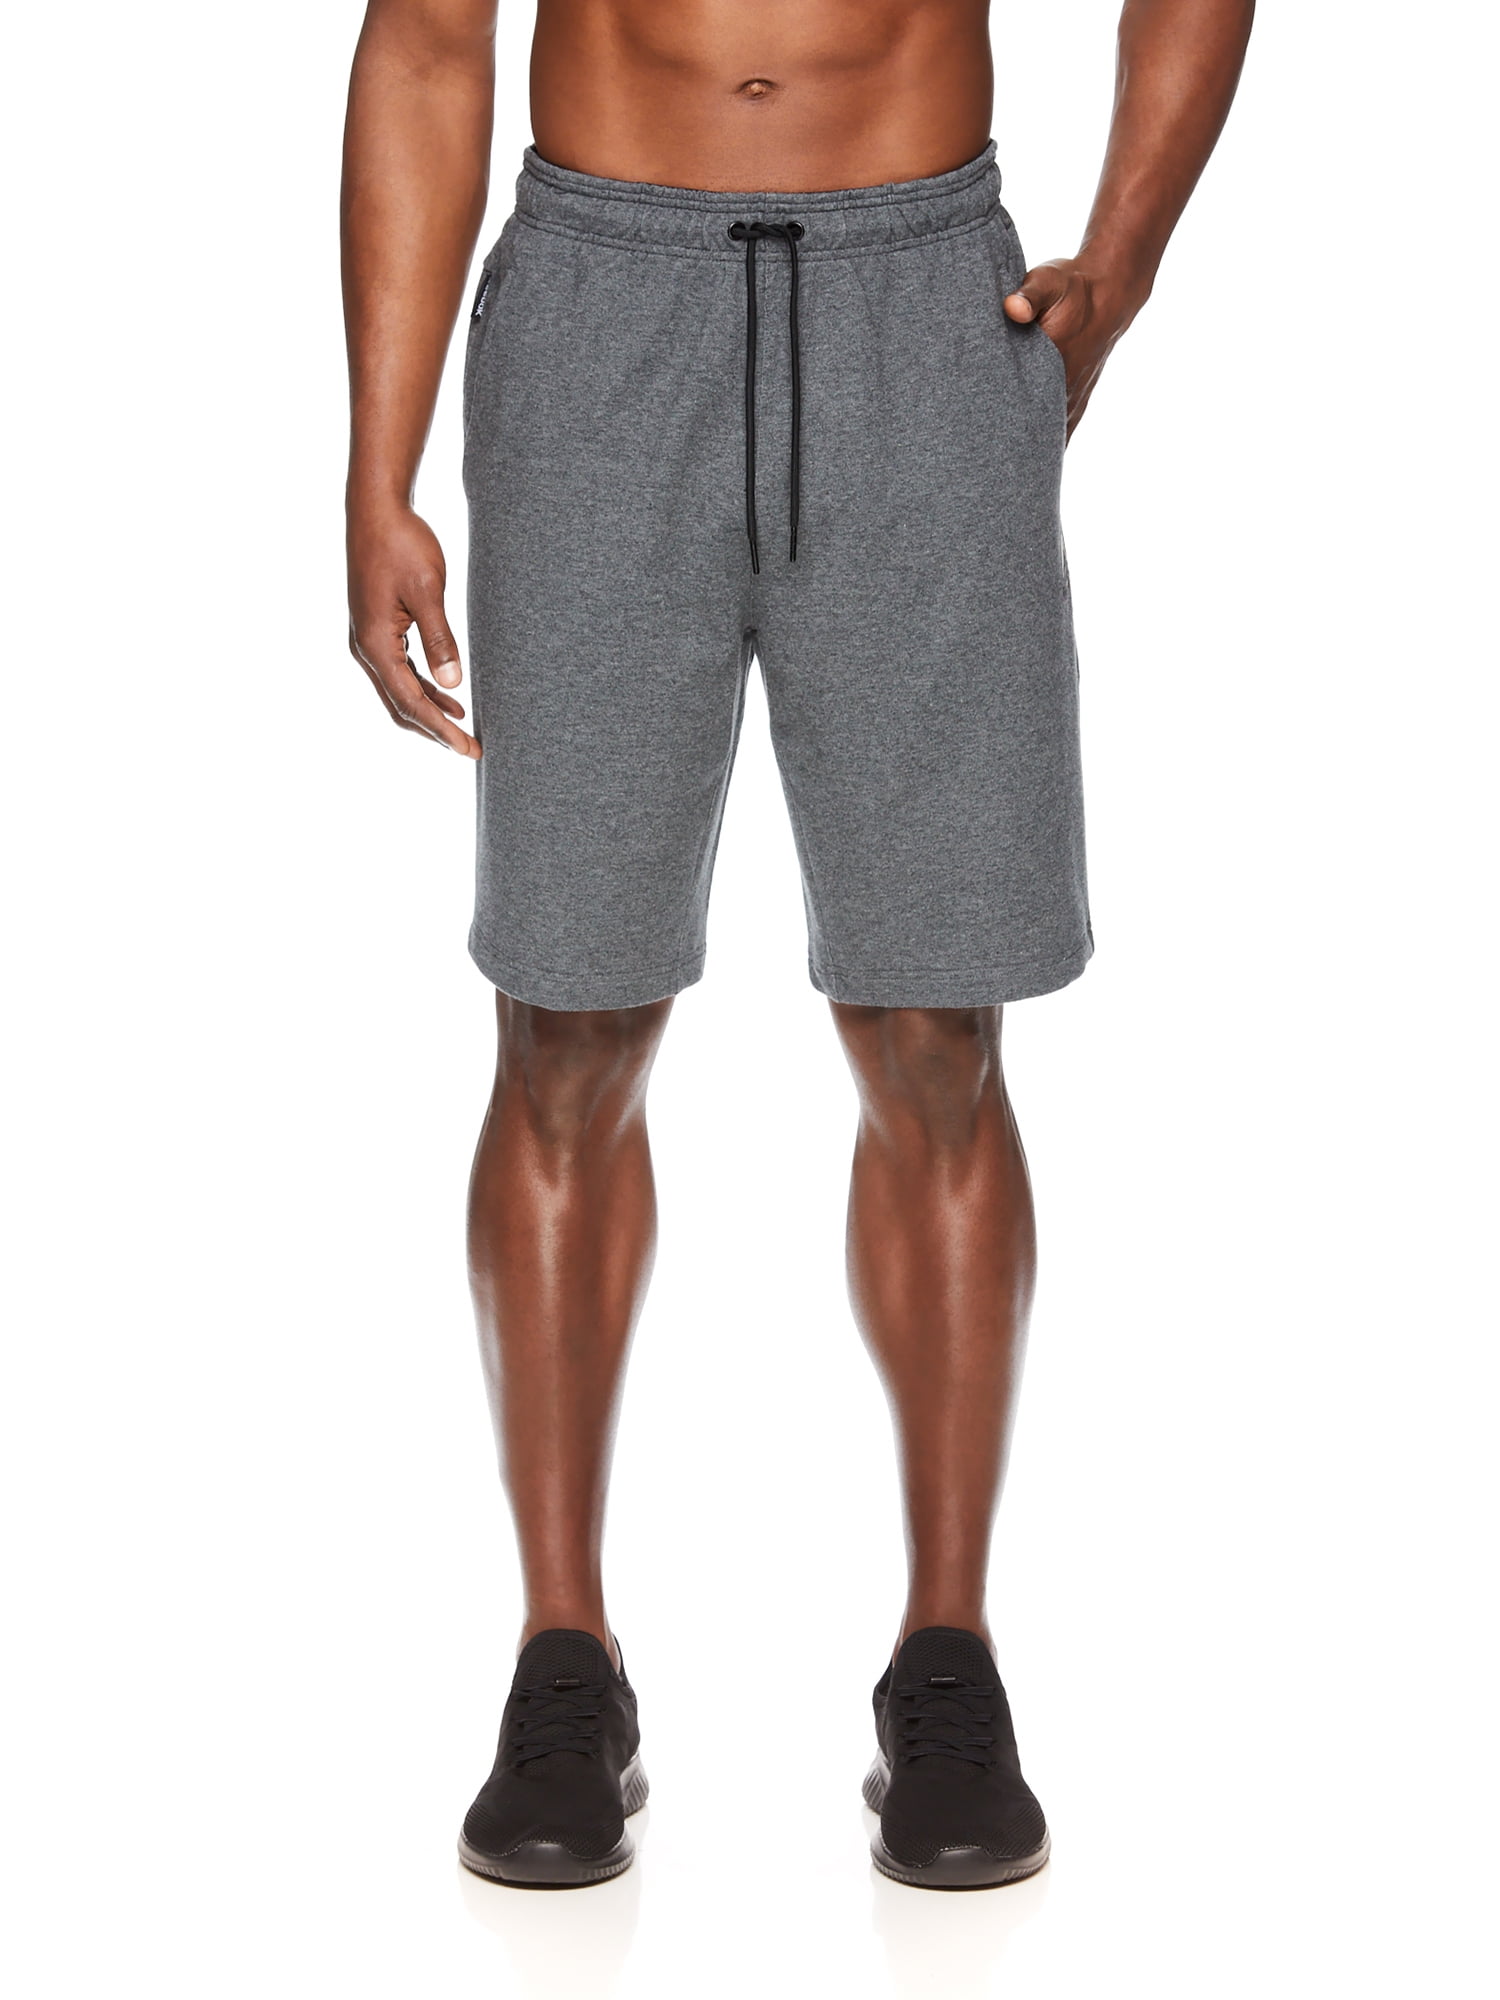 Men's and Big Men's Active Stretch Training Knit 10" Inseam, up to Size 3XL - Walmart.com